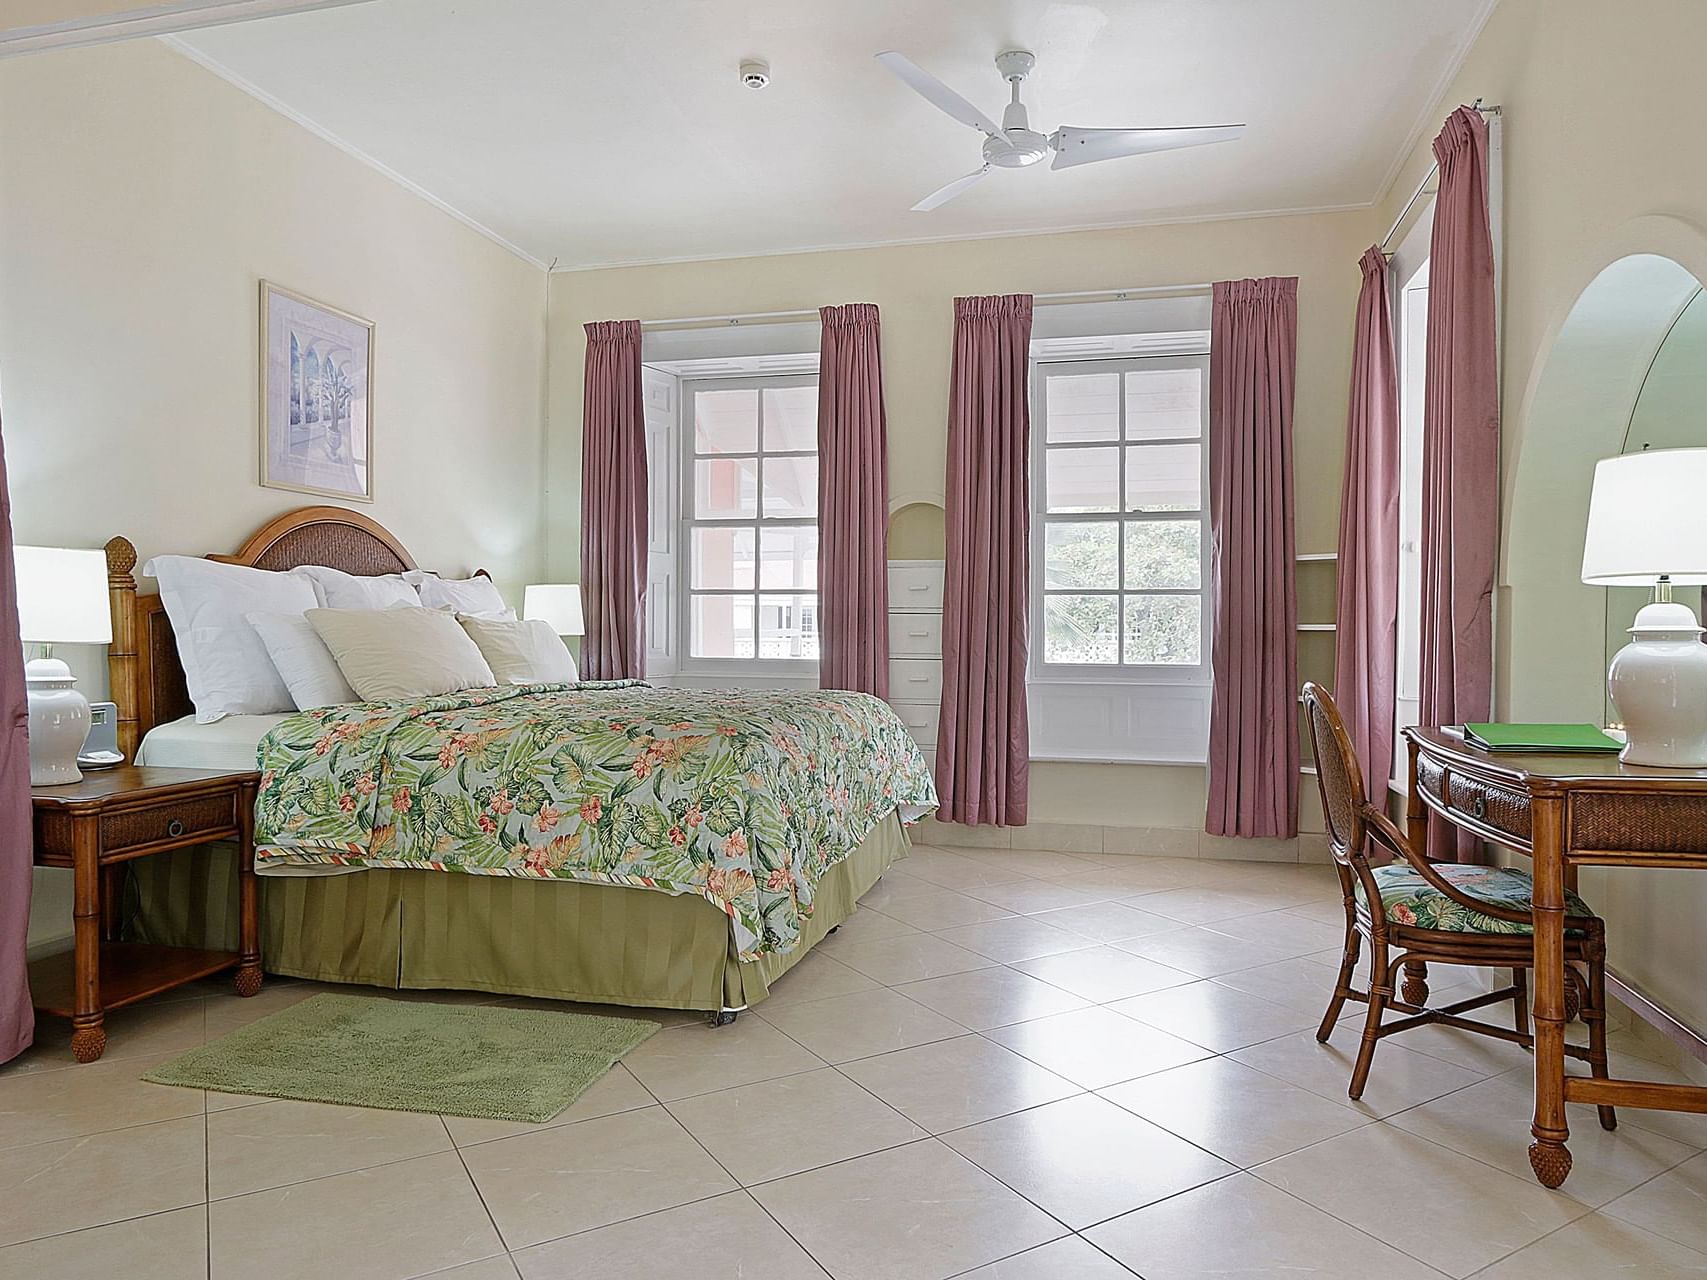 Bed & furniture in Junior Suite at Southern Palms Beach Club